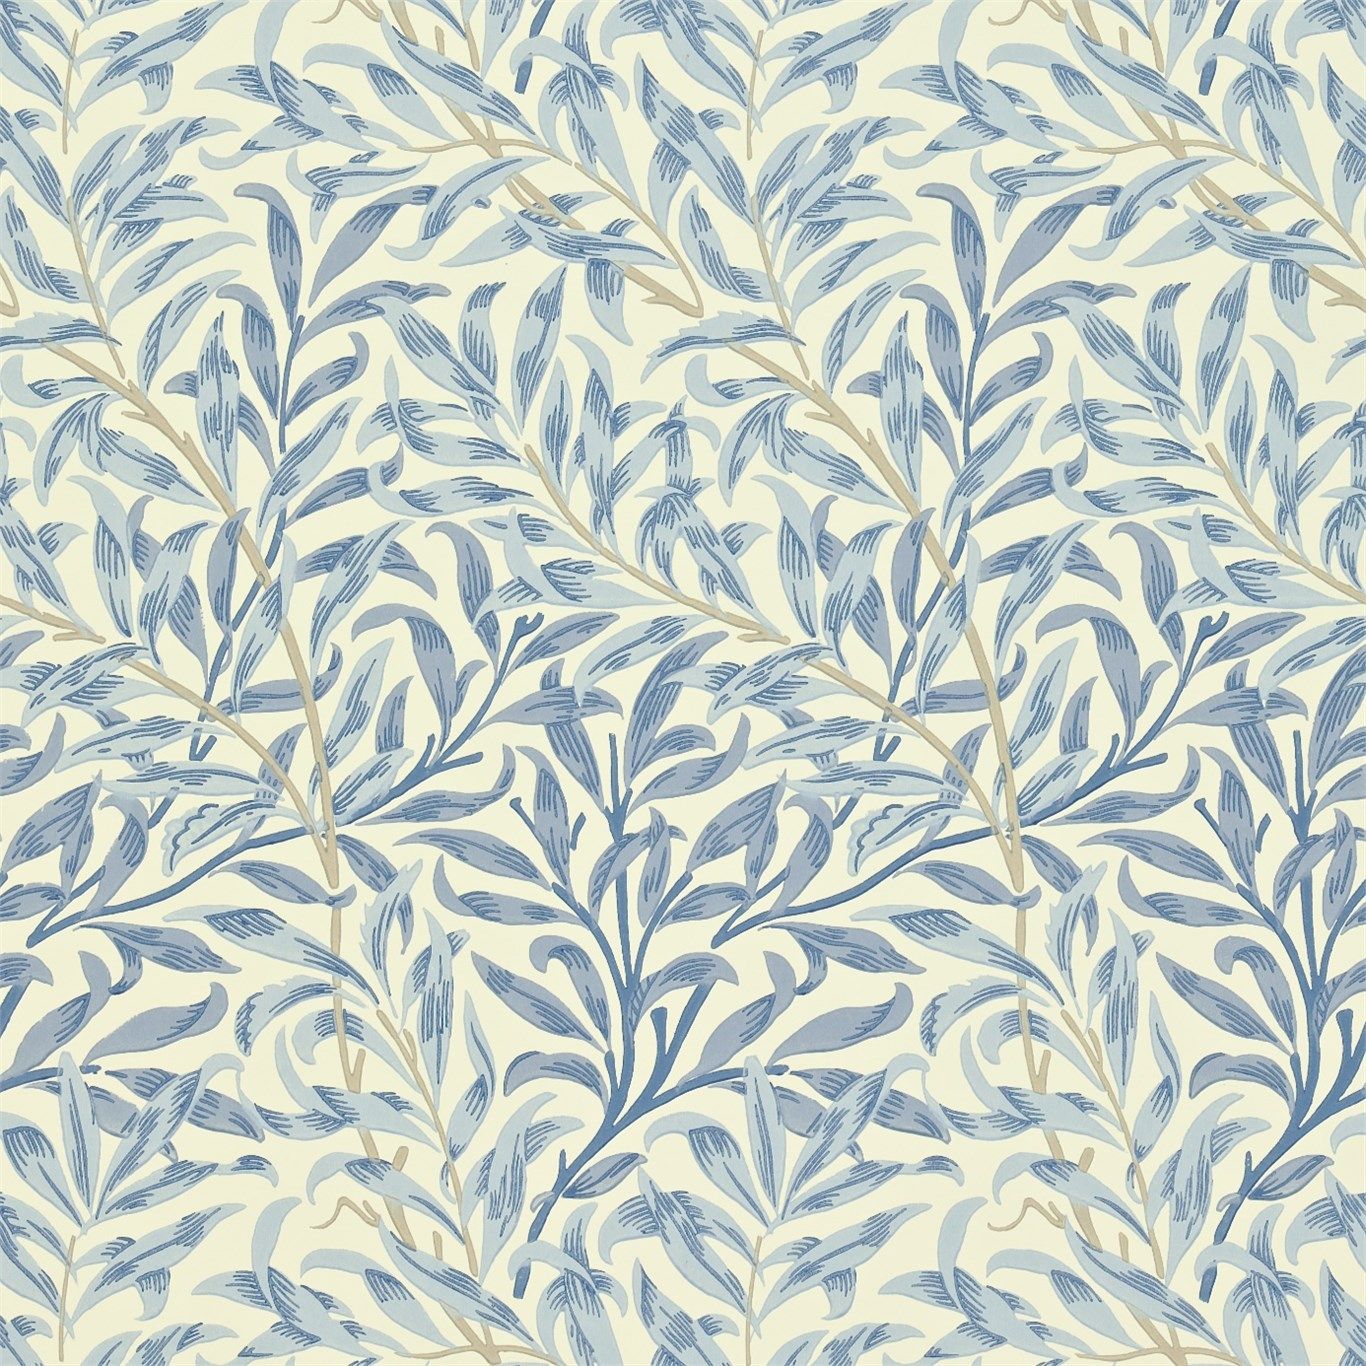 Free download Original Morris Co Arts and crafts fabrics and wallpaper designs [1366x1366] for your Desktop, Mobile & Tablet. Explore Arts and Crafts Wallpaper Patterns. William Morris Reproduction Wallpaper